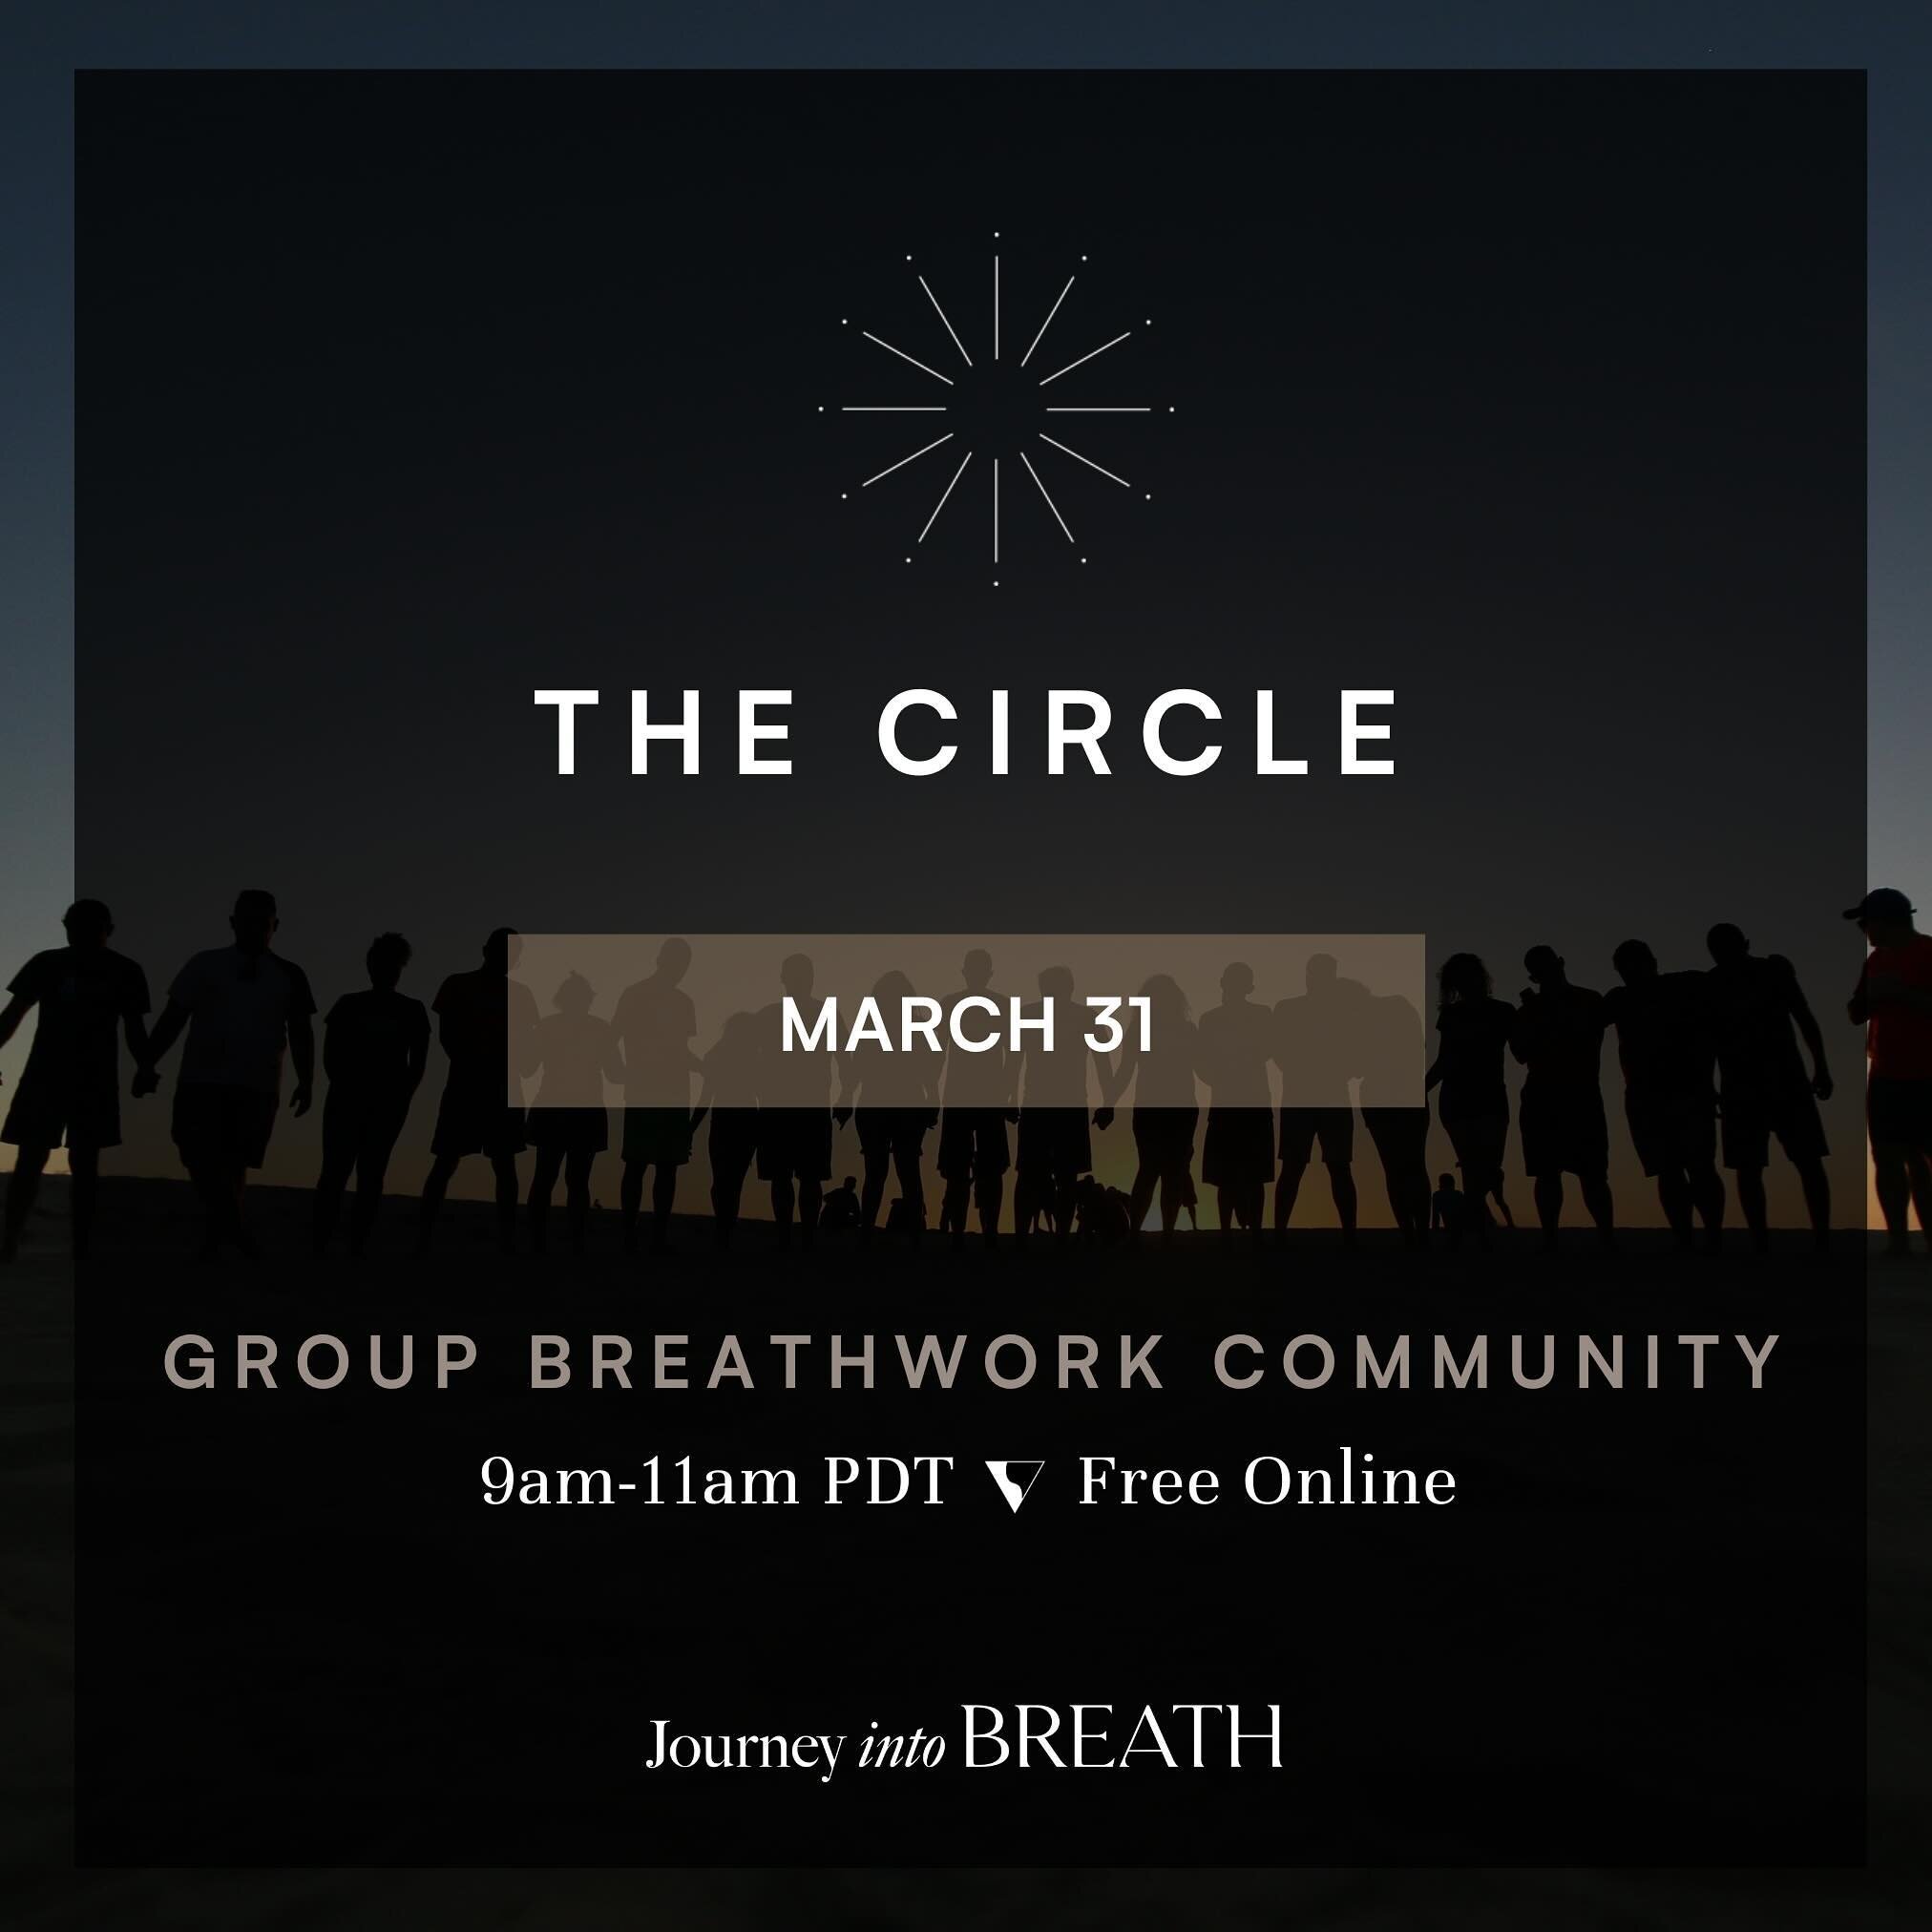 Our Monthly Online Breathwork Circle is coming up!

Come join us:
Sunday
March 31
9am PST

These circles are a place to ground the energy you experienced this month, to integrate anything that may have come up for you, and to breathe new freedom and 